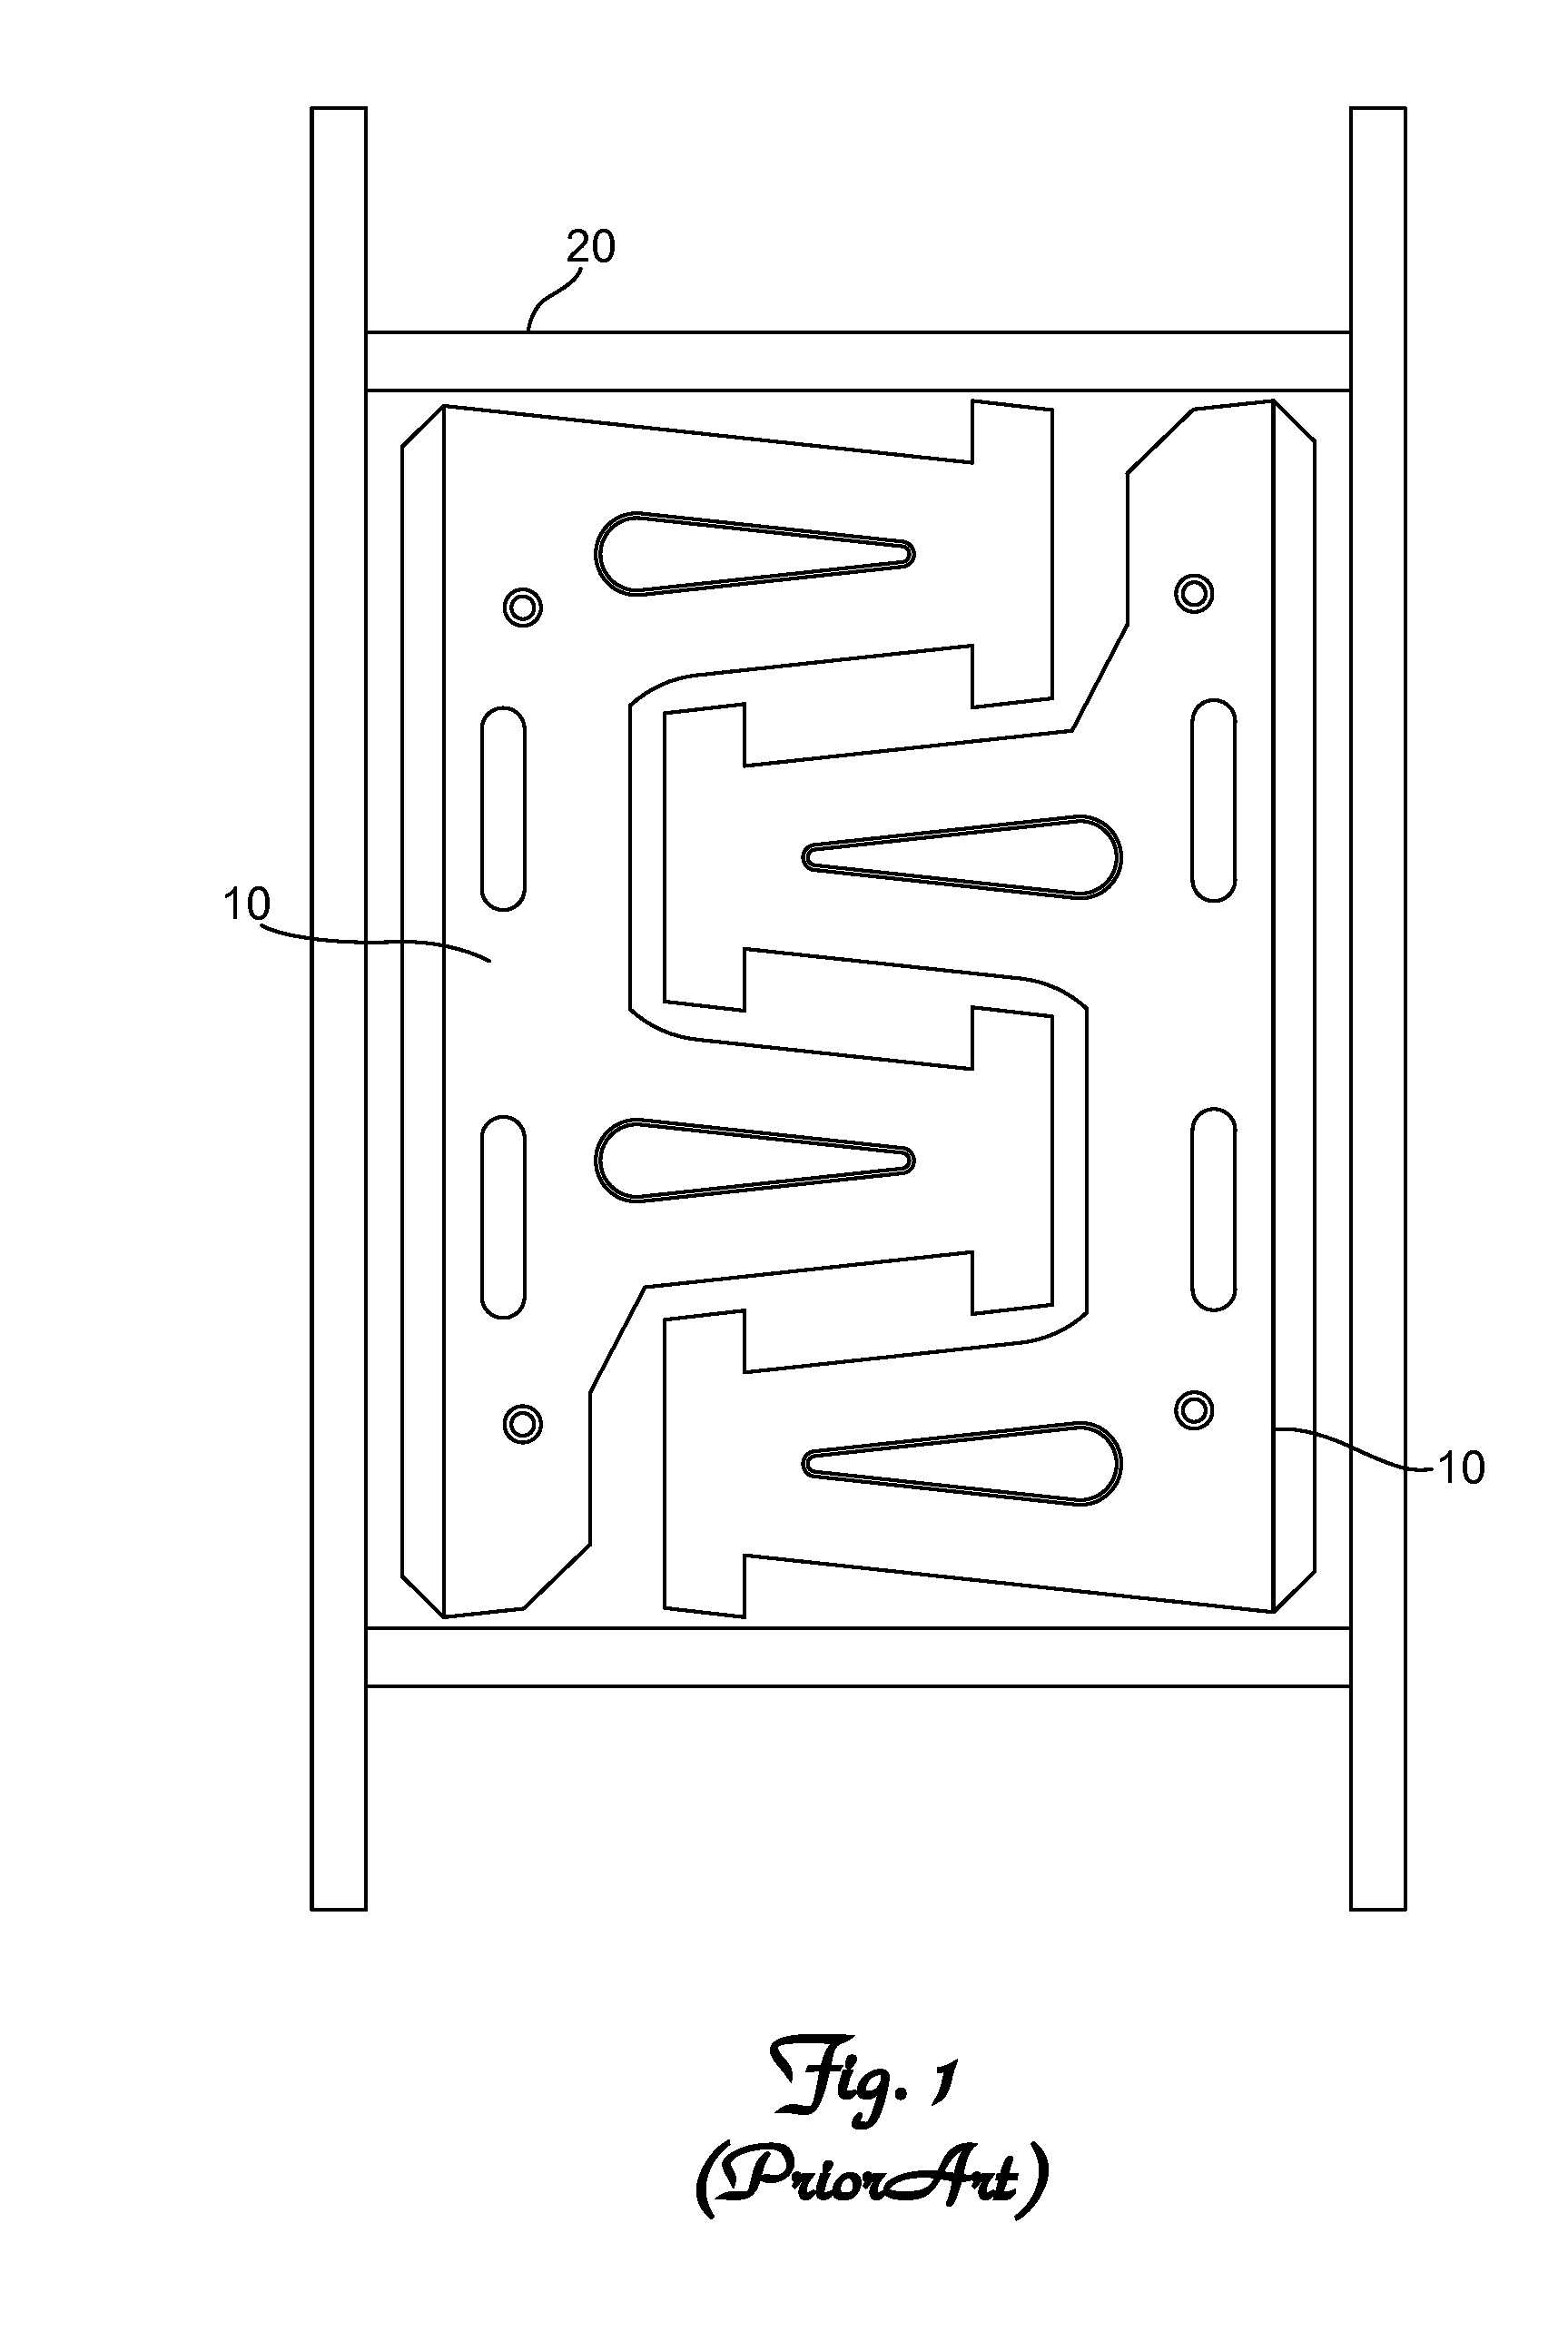 Wall block with weight bearing pads and method of producing wall blocks